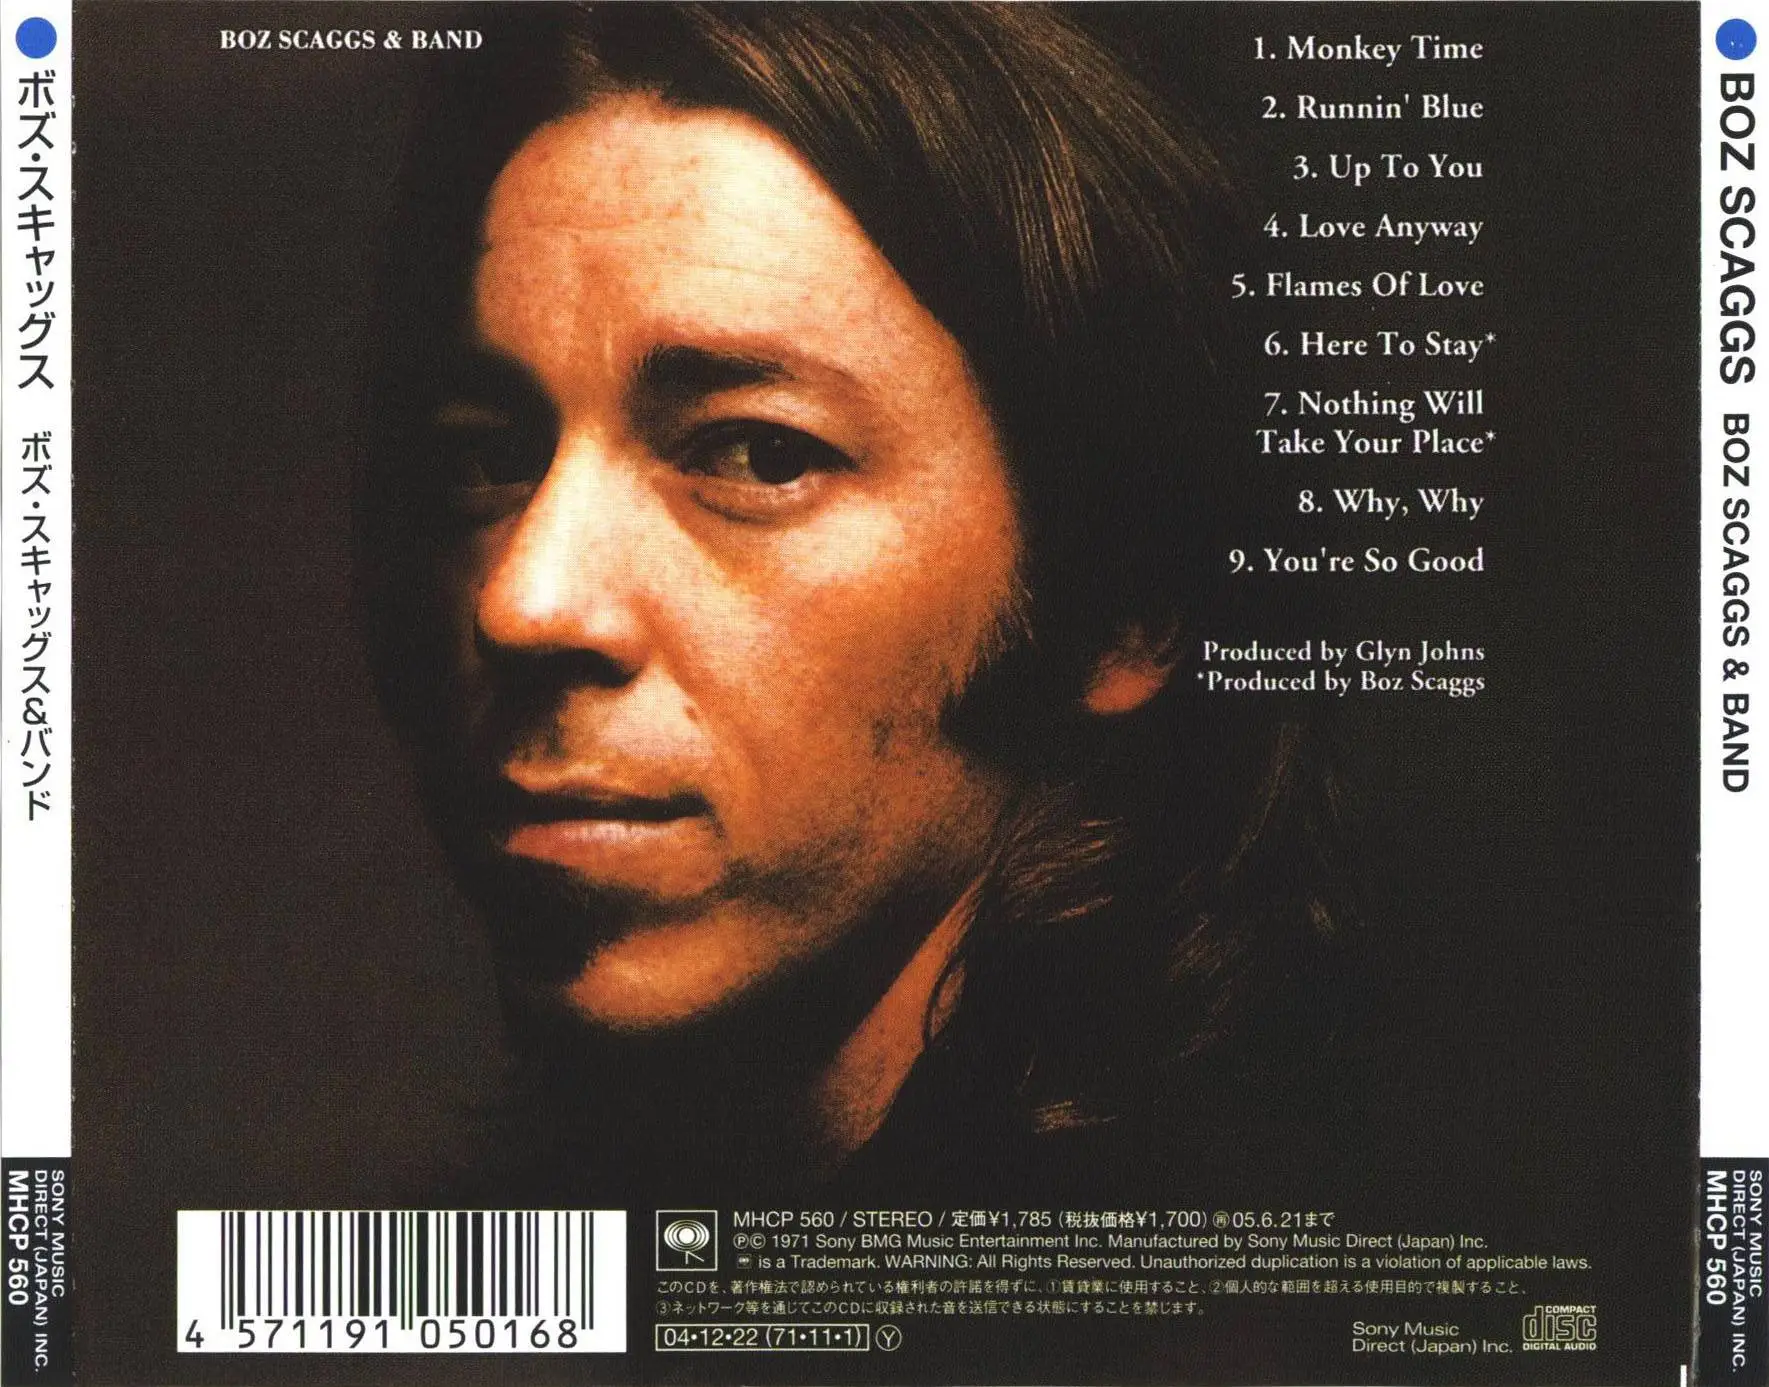 Boz Scaggs - Boz Scaggs & Band (1971) Remastered 2005 Re-Up.